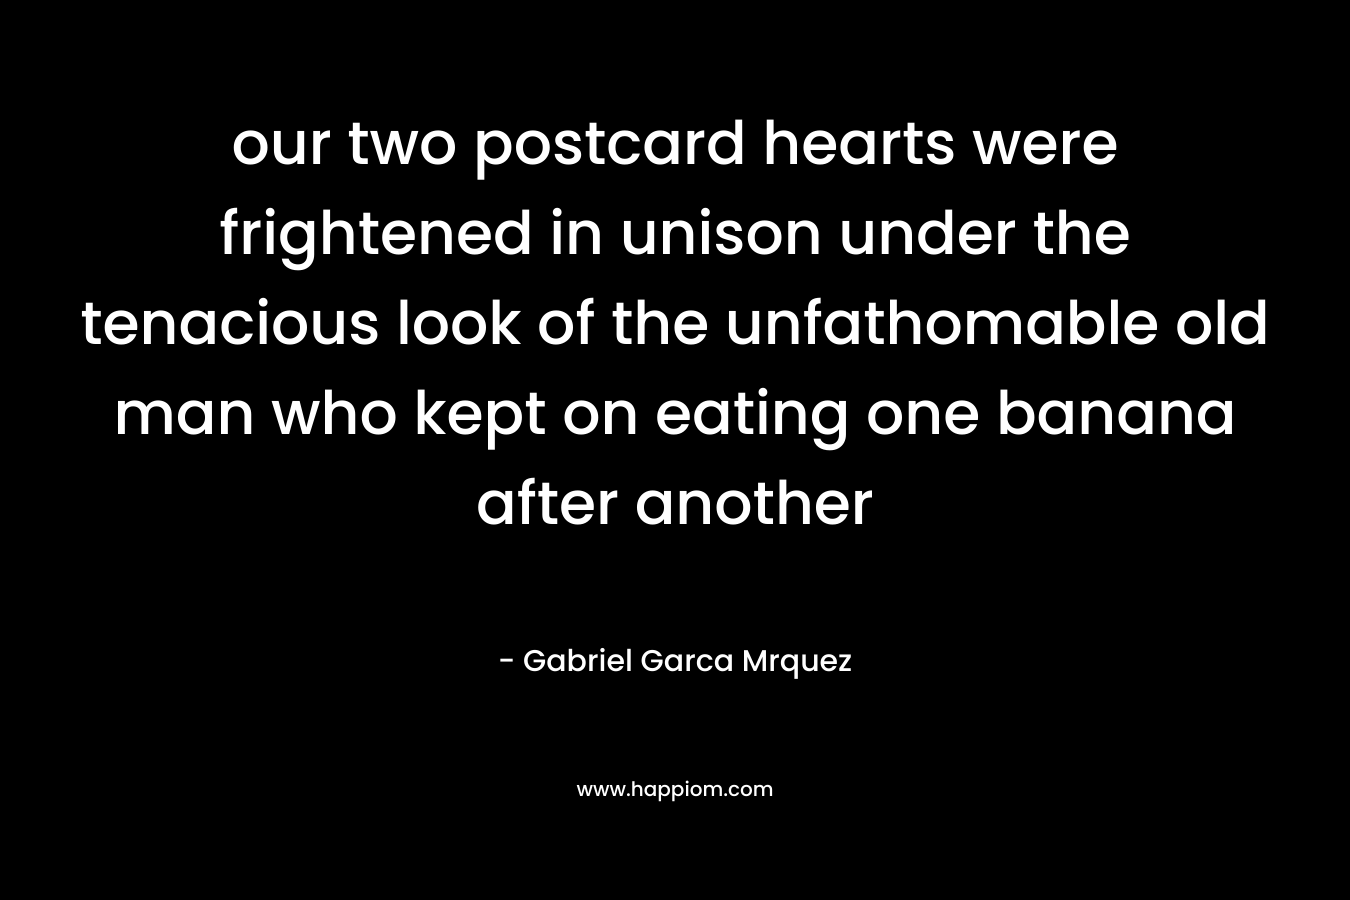 our two postcard hearts were frightened in unison under the tenacious look of the unfathomable old man who kept on eating one banana after another – Gabriel Garca Mrquez